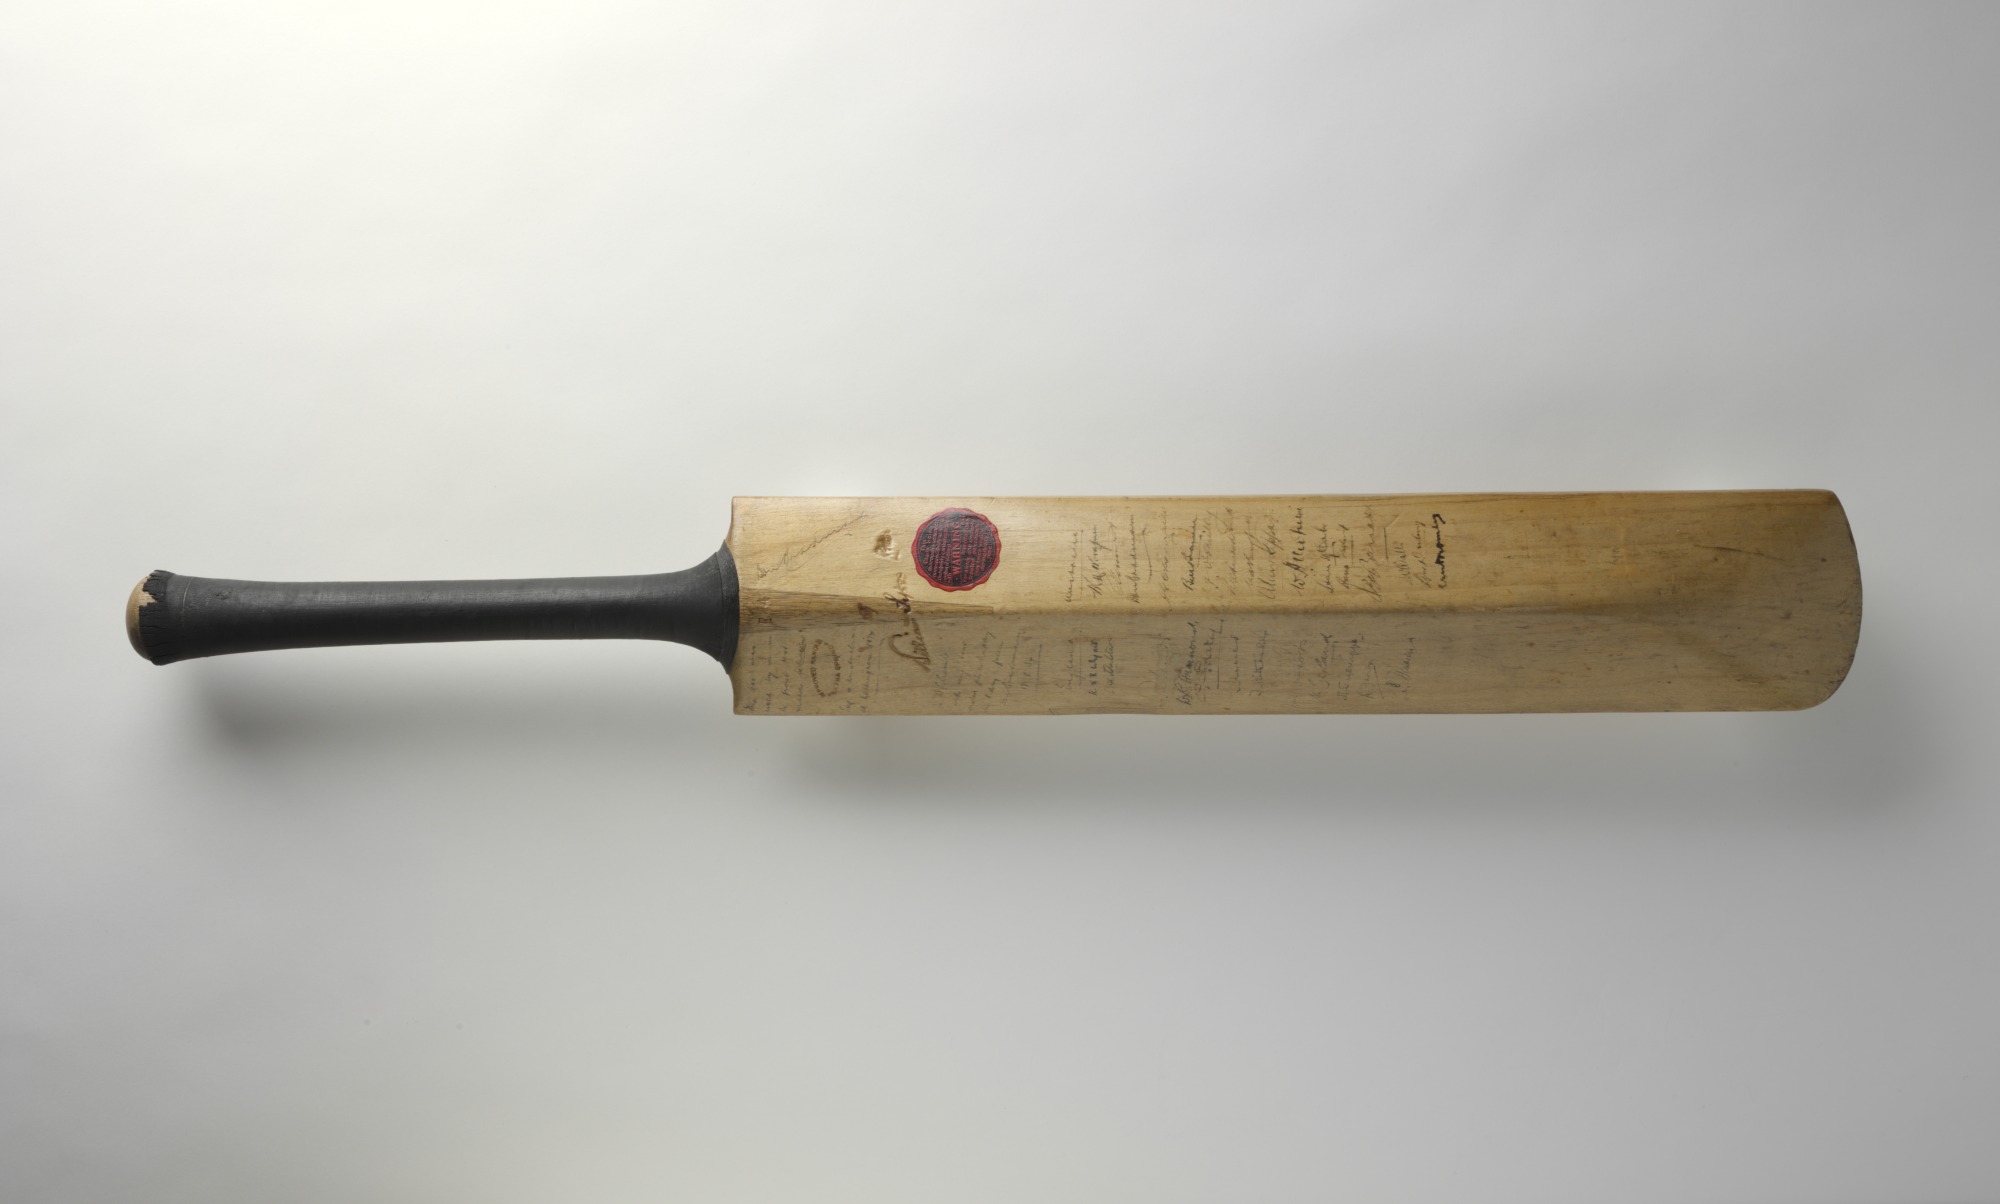 Autographed cricket bat used by Don Bradman.